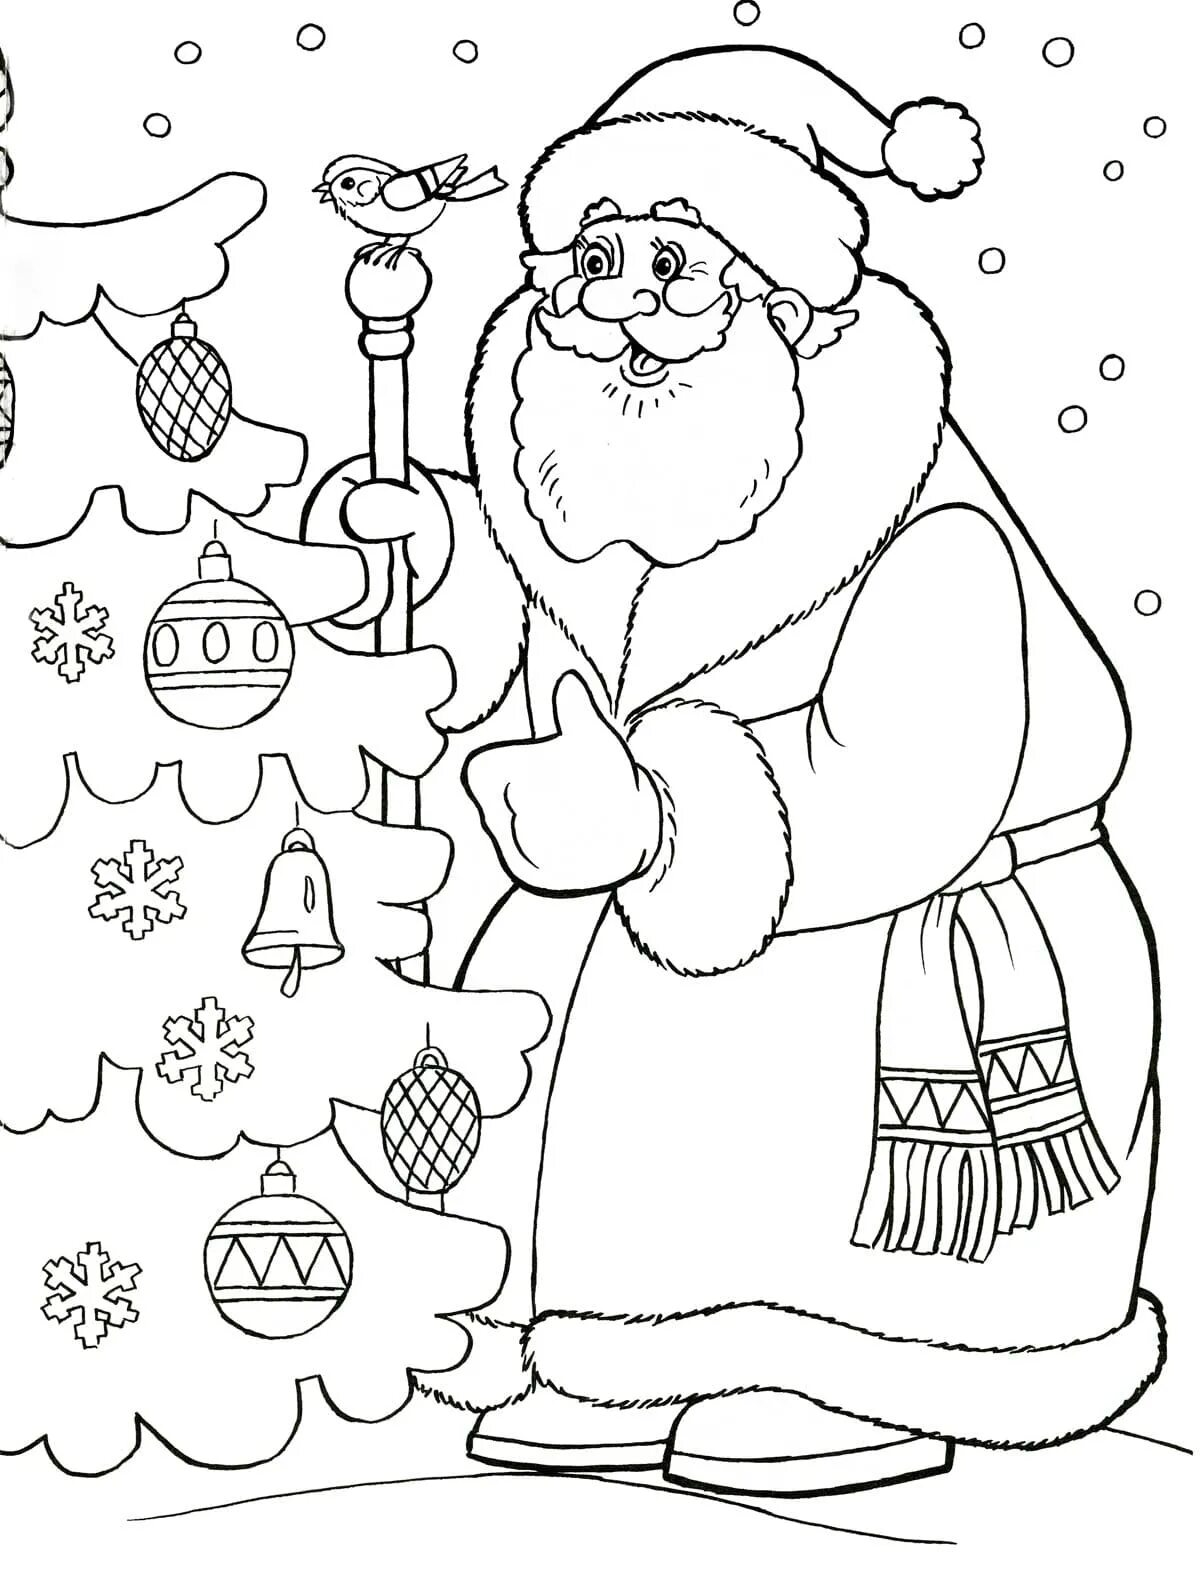 Delightful drawing of Santa Claus and Snow Maiden